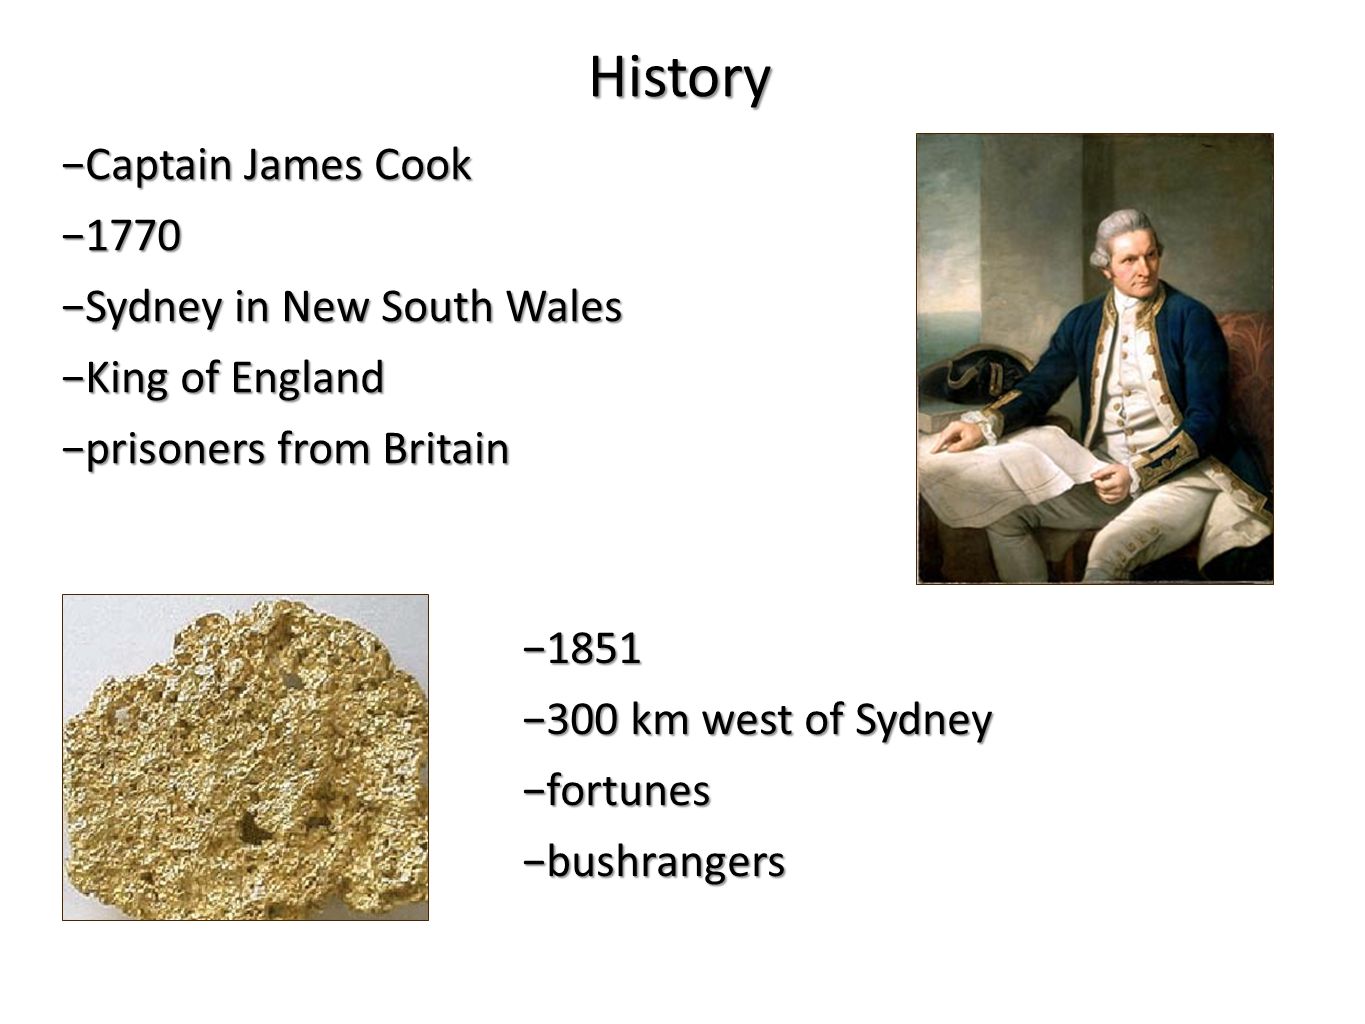 −Captain James Cook −1770 −Sydney in New South Wales −King of England −prisoners from Britain −1851 −300 km west of Sydney −fortunes −bushrangers History